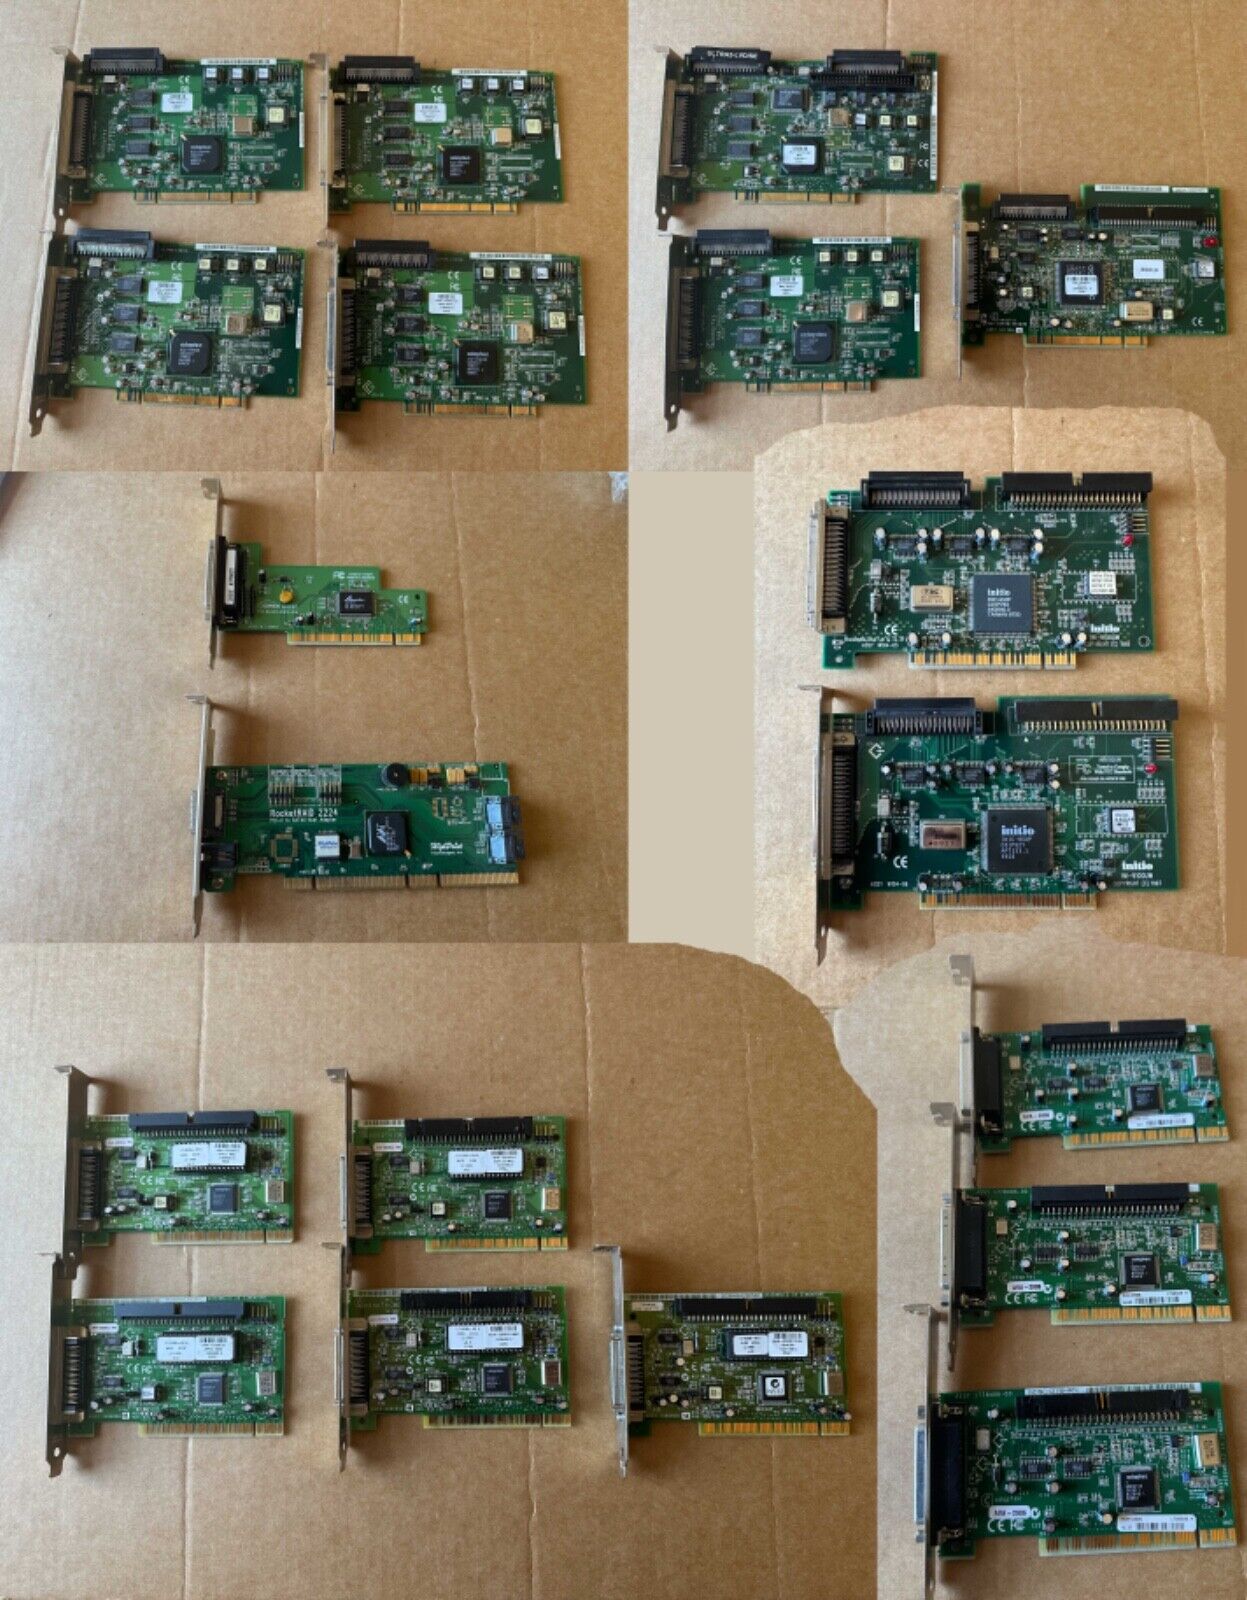 LOT of *19* SCSI cards 15 ADAPTEC cards and ROCKETRAID & INITIO - GREAT DEAL